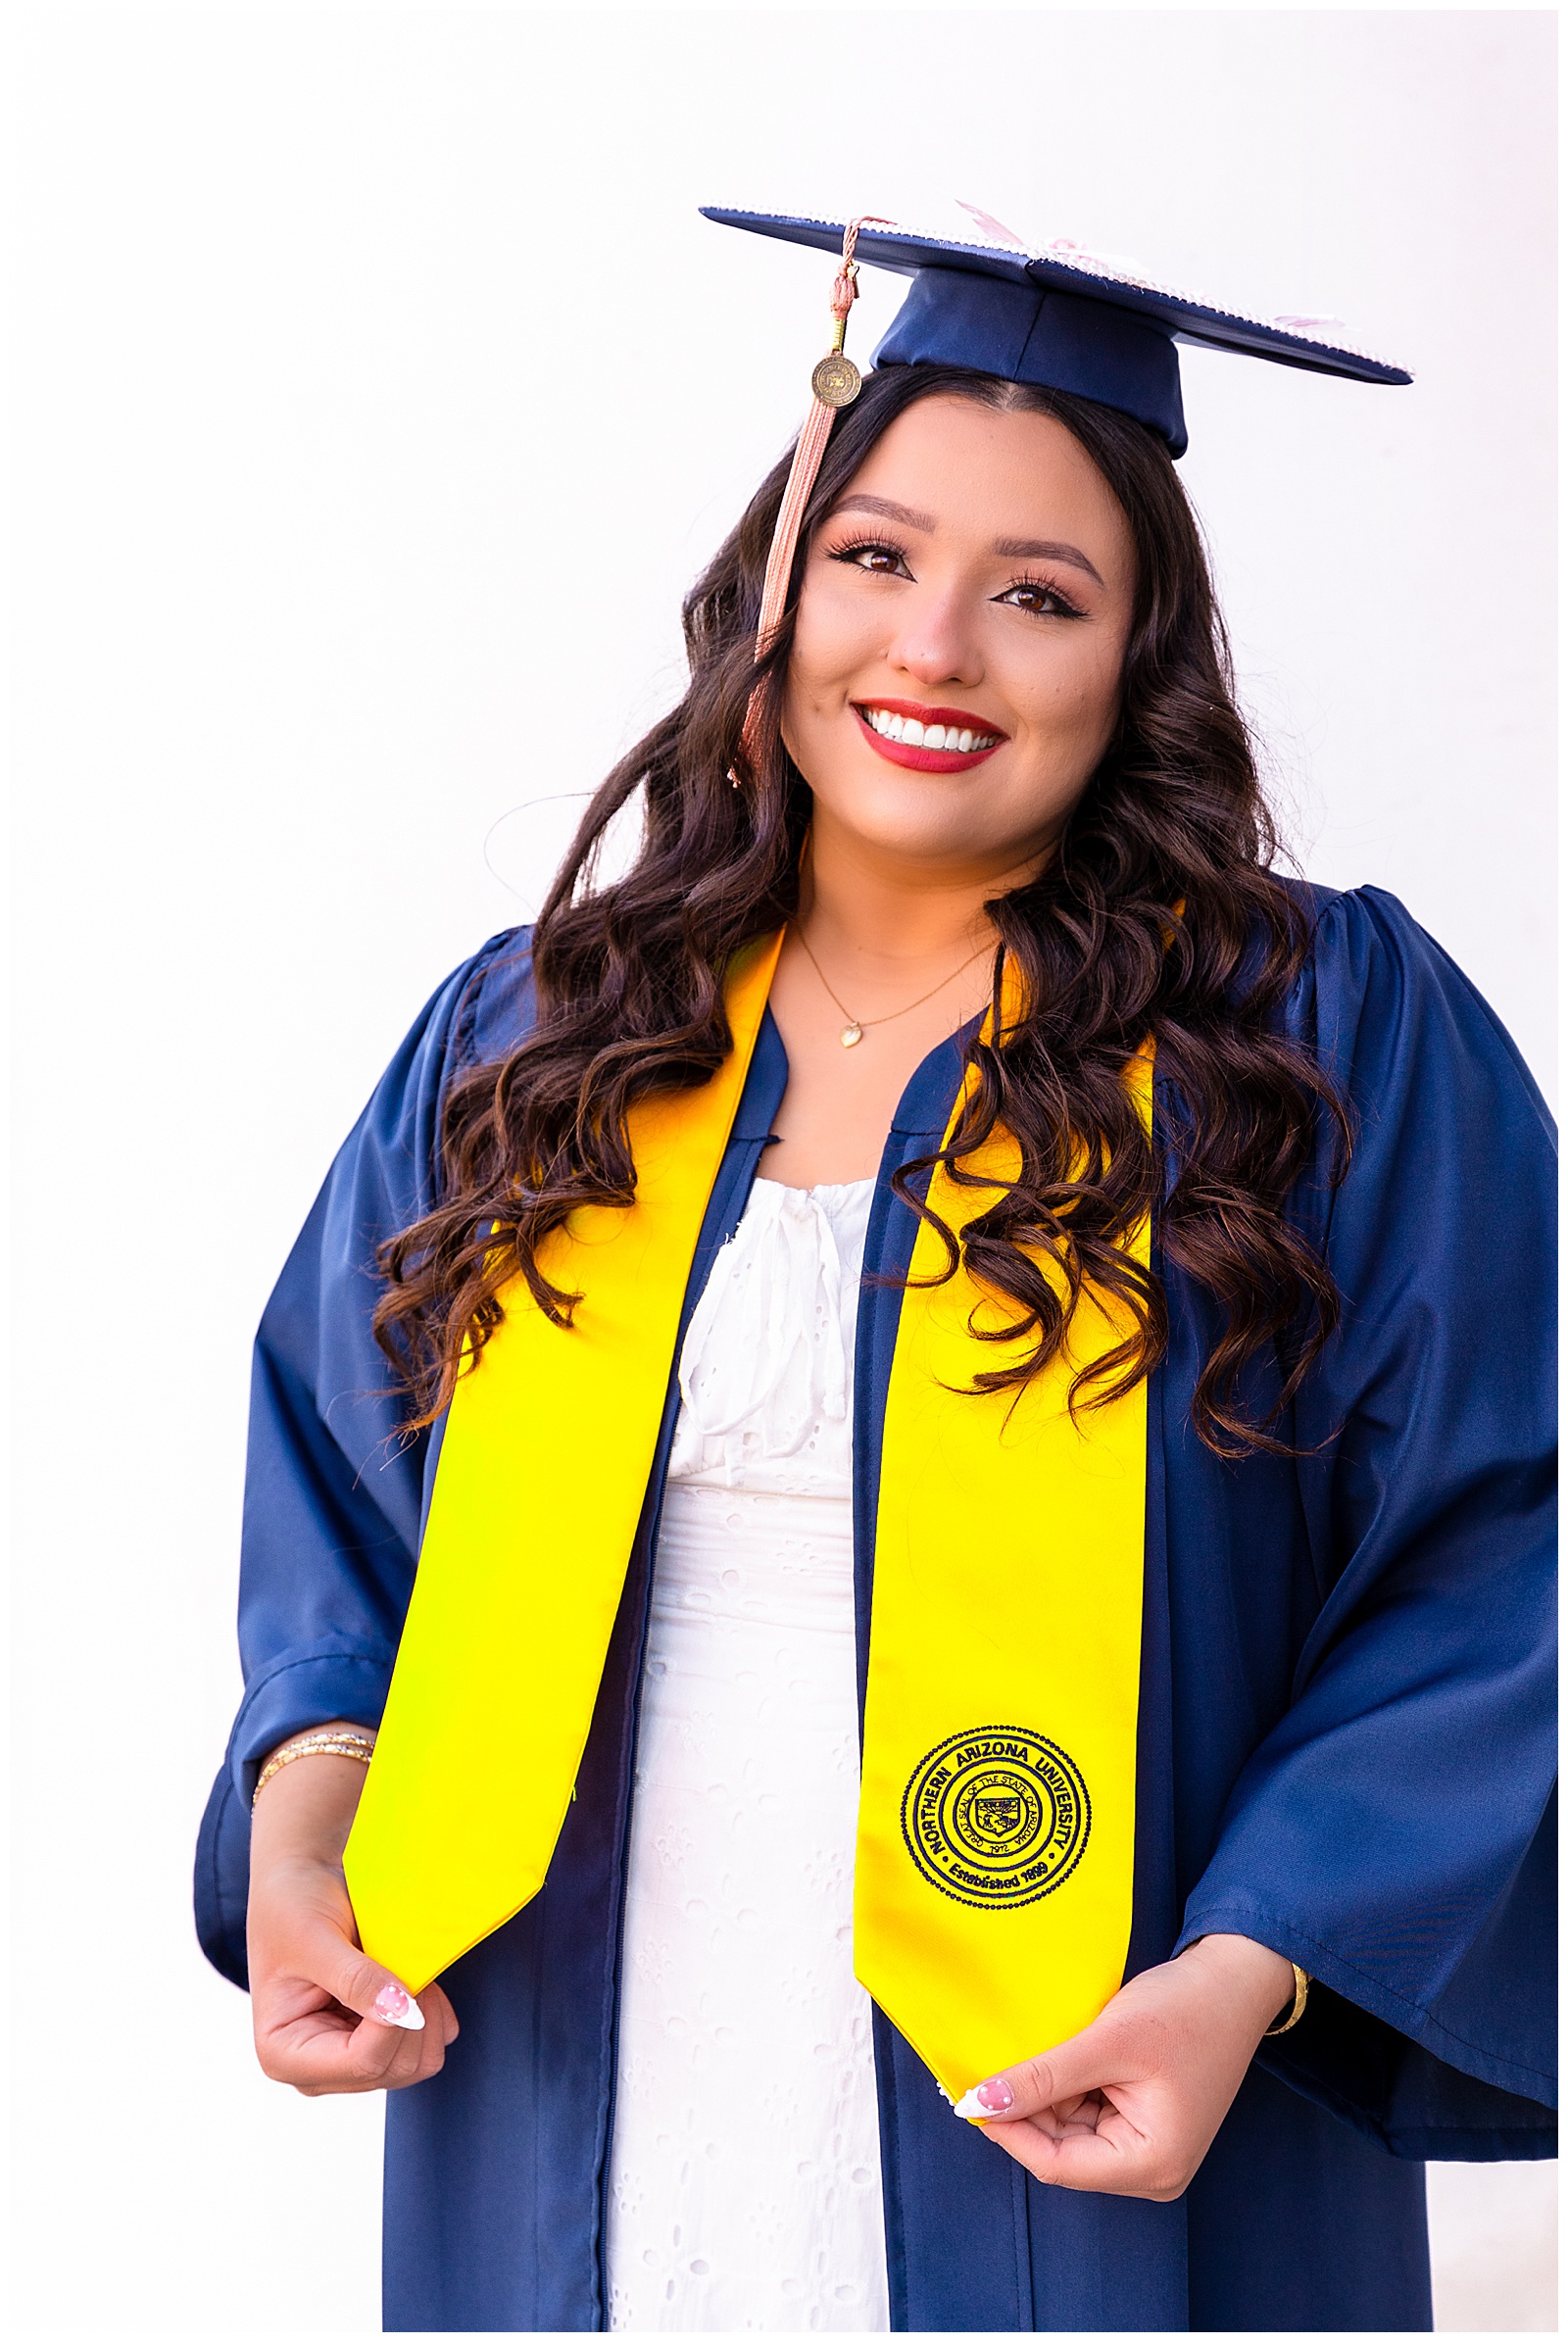 Beautiful graduate from NAU in Flagstaff Arizona shows off her golden sash while wearing navy blue cap and gown.